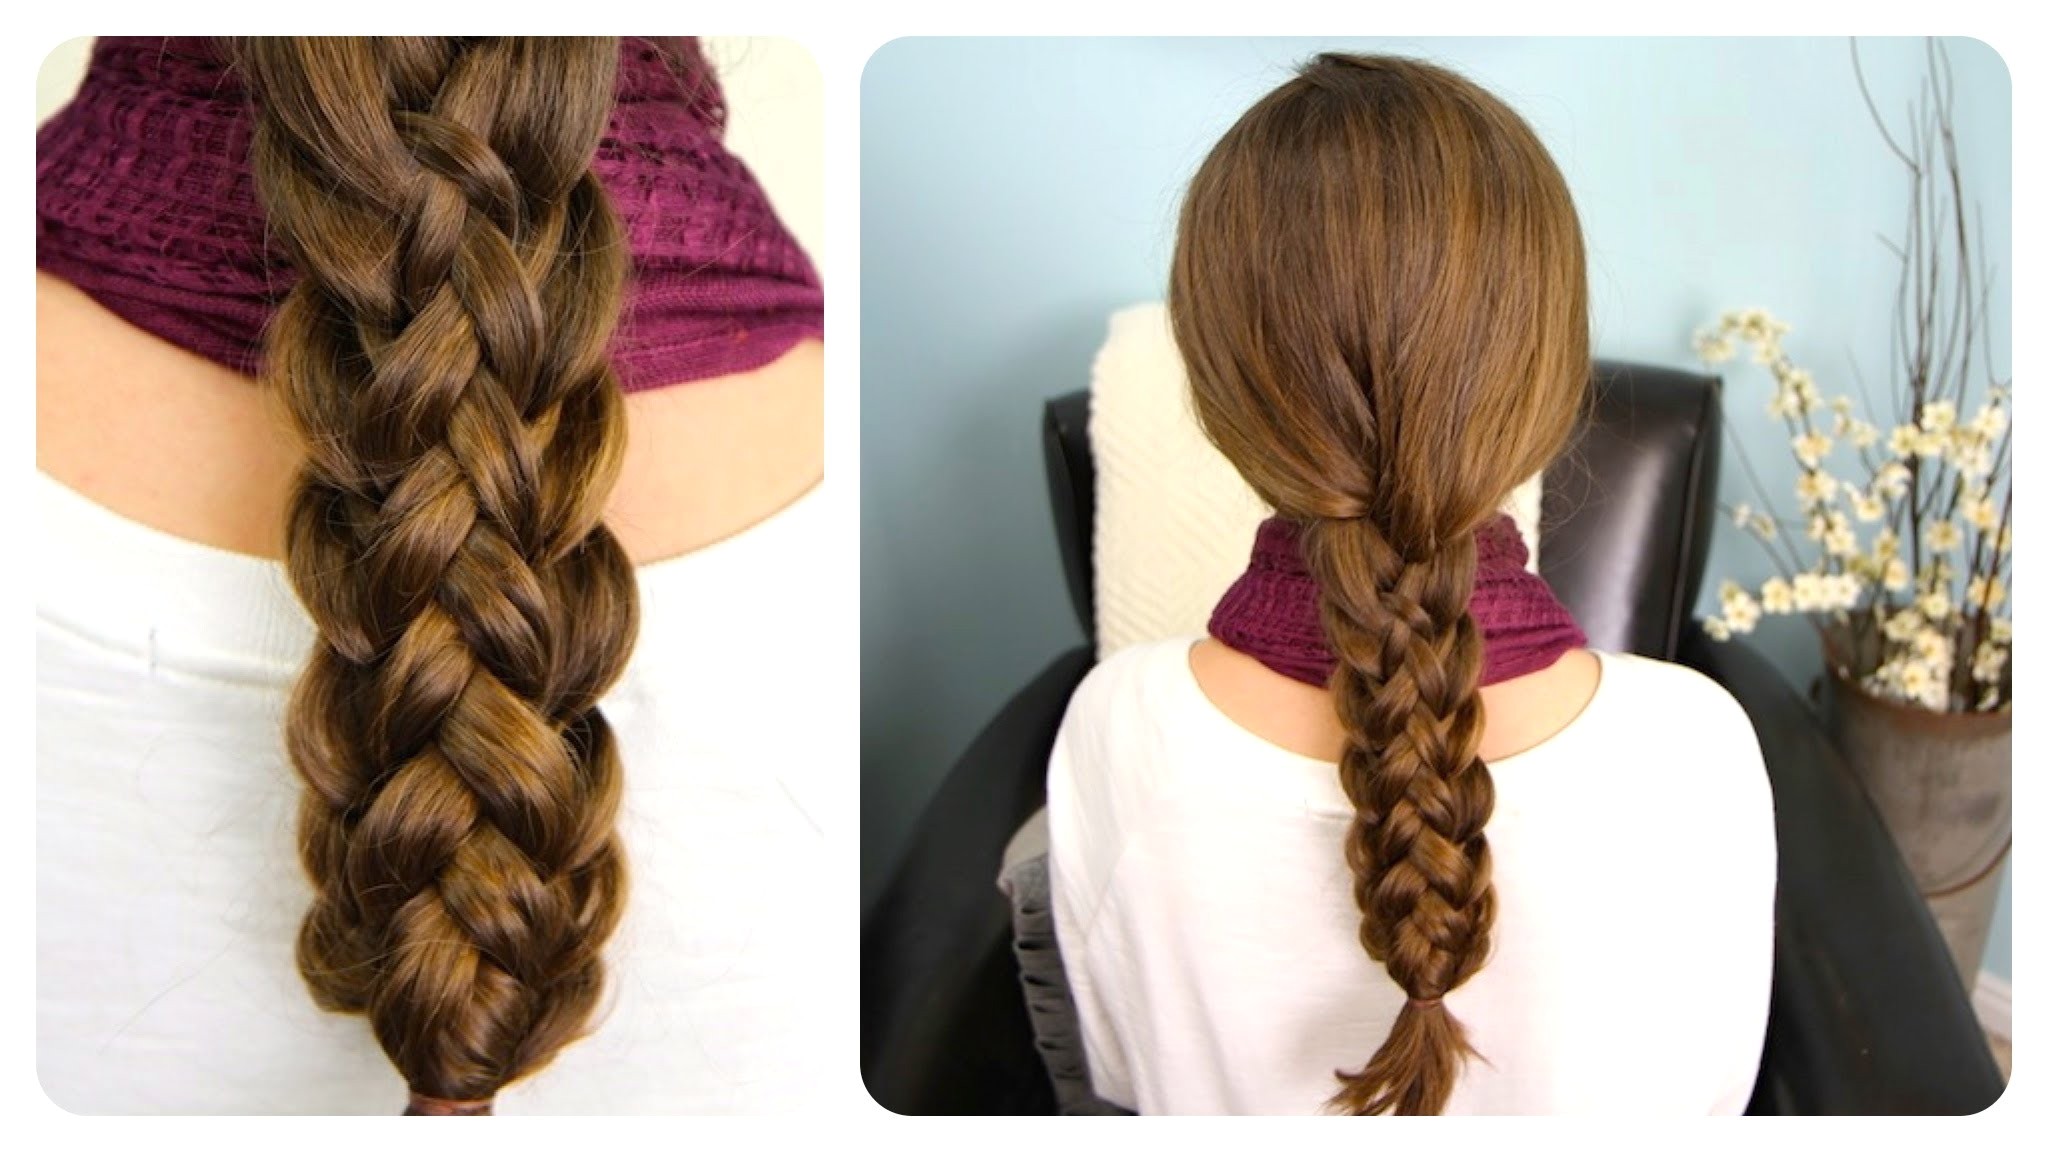 how to do cute stacked braids hairstyles for long hair diy tutorial step by step instructions